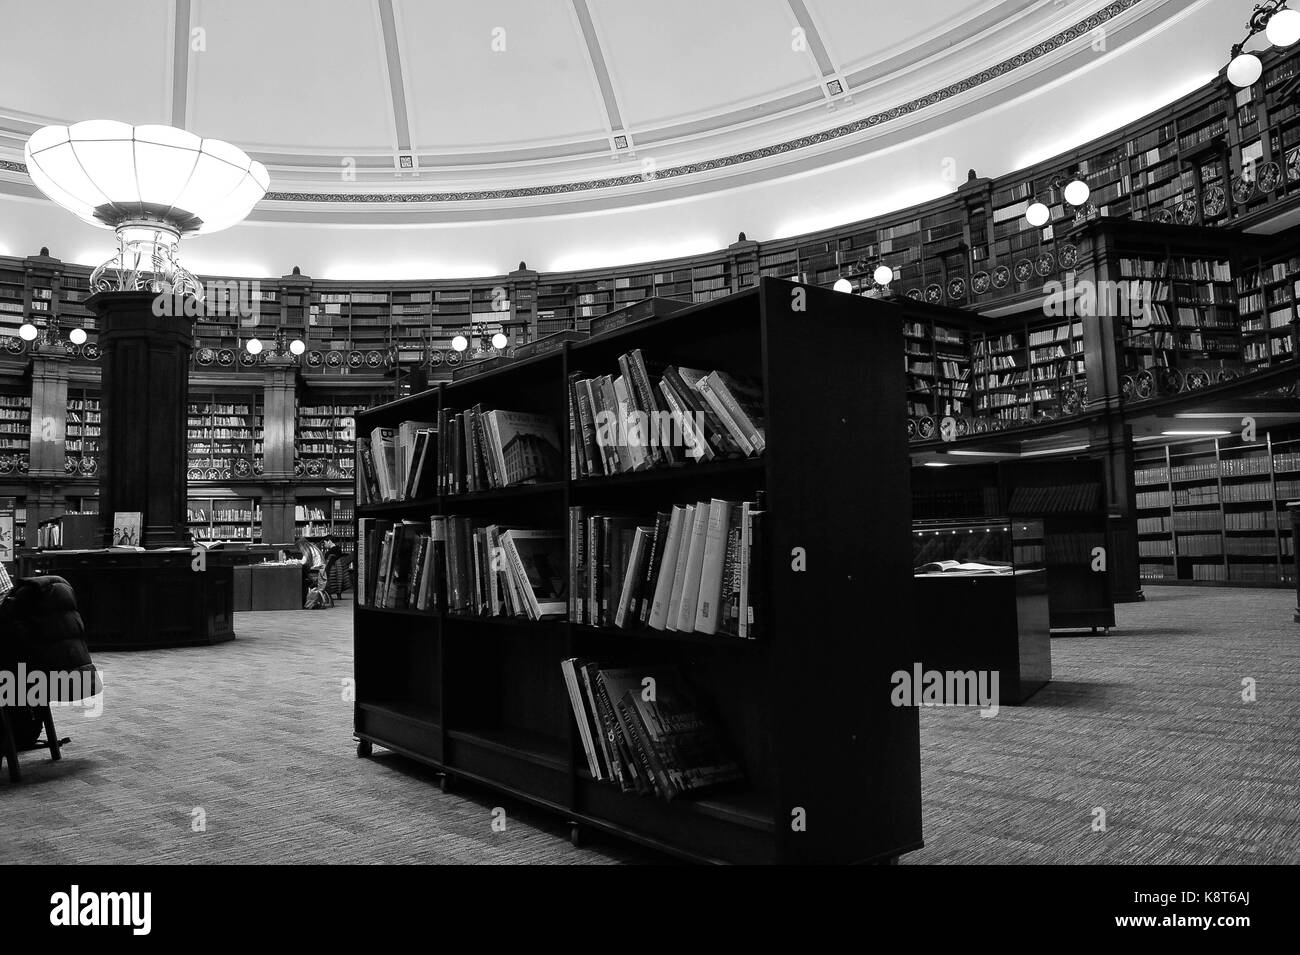 Liverpool Central Library, Picton Suite. Stock Photo